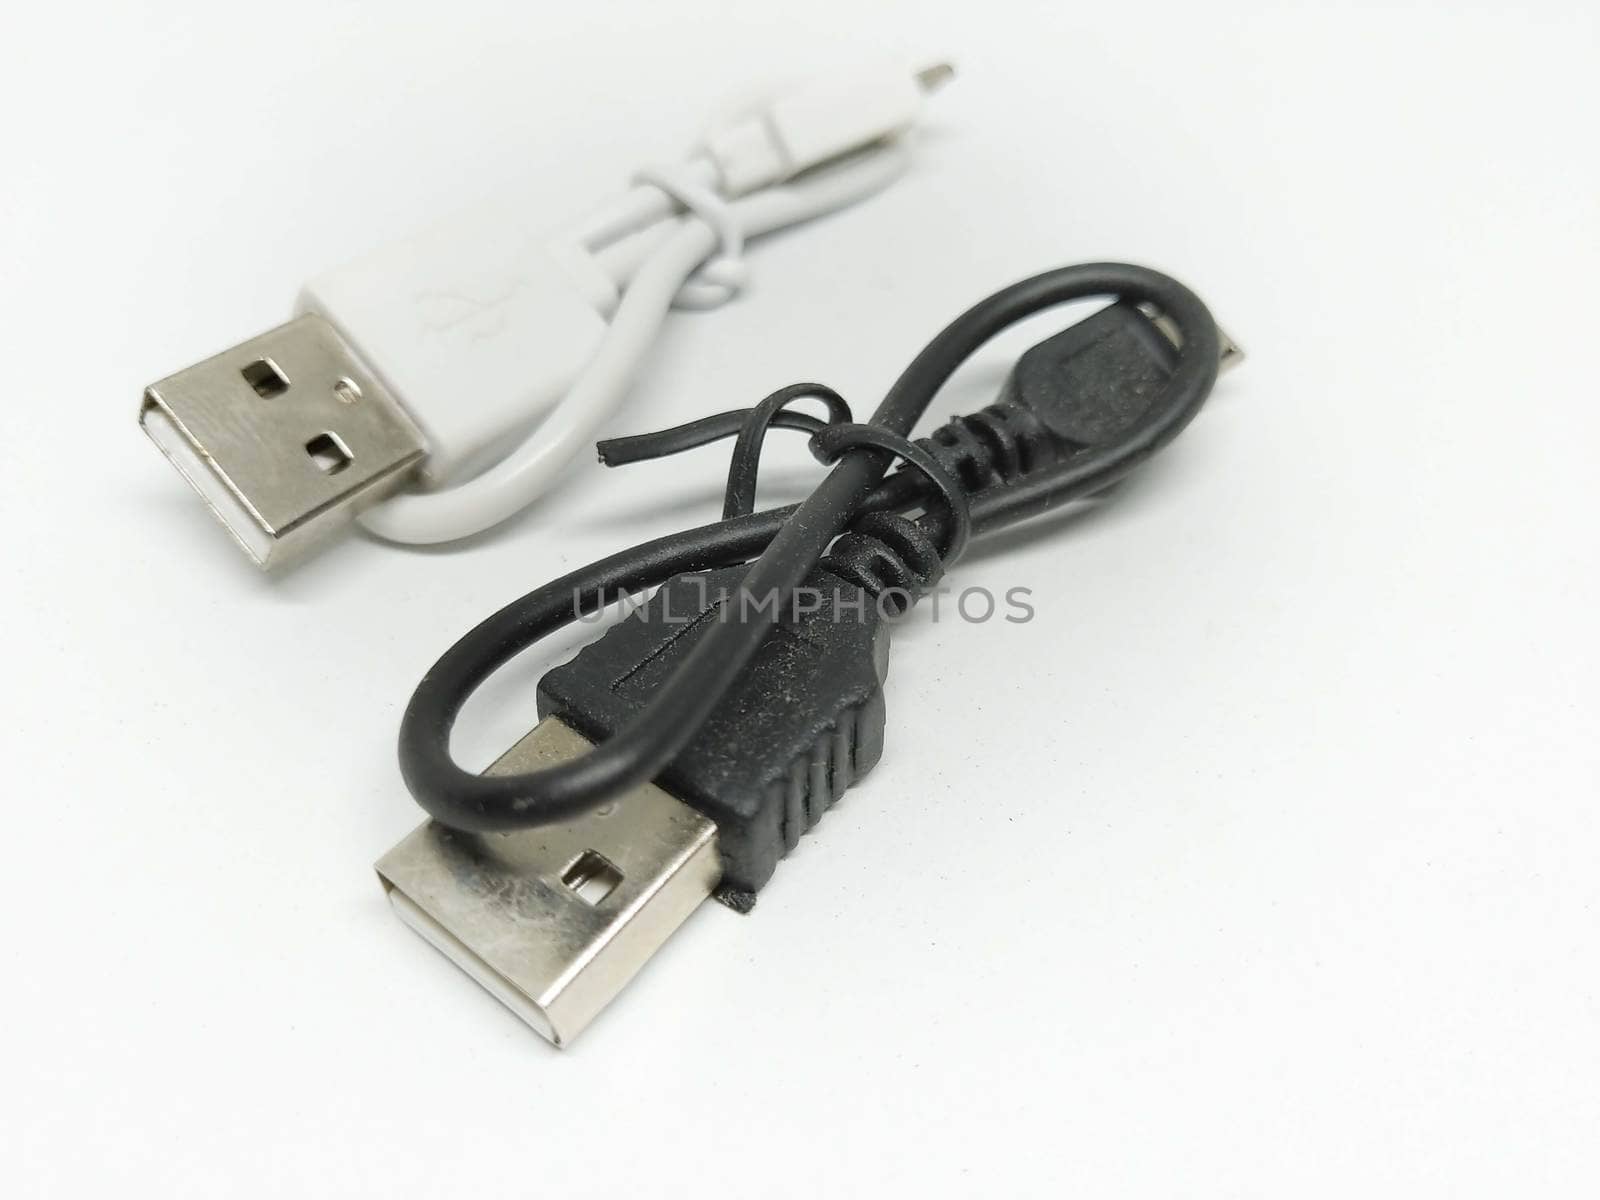 Usb cable resting on a white background